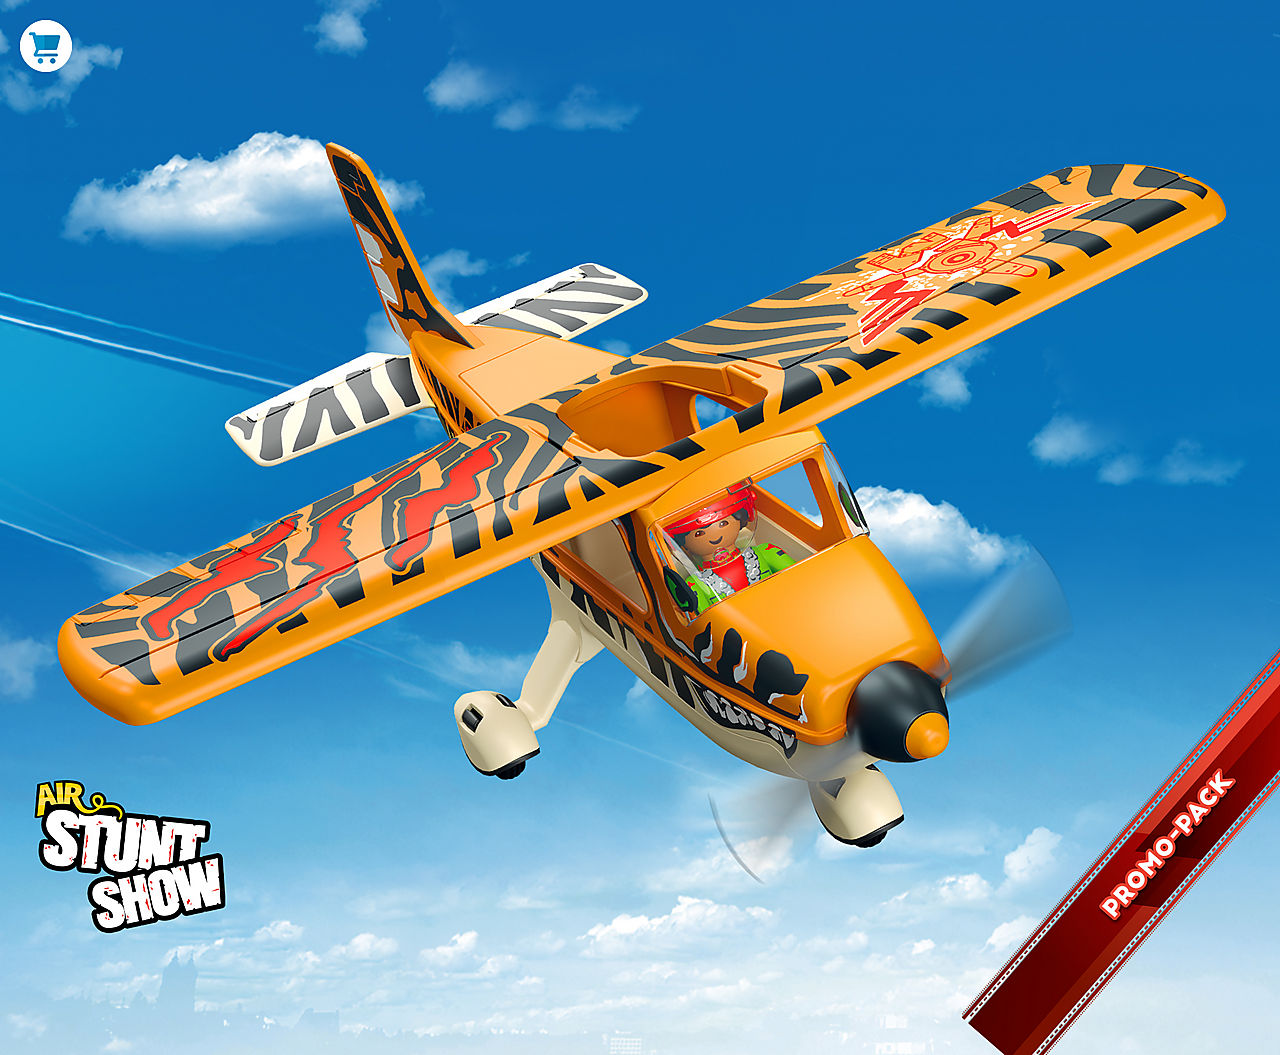 Discover the new Promo Packs like 70902 Air Stunt Show Tiger Propeller Plane or 70886 Mermaids Daycare